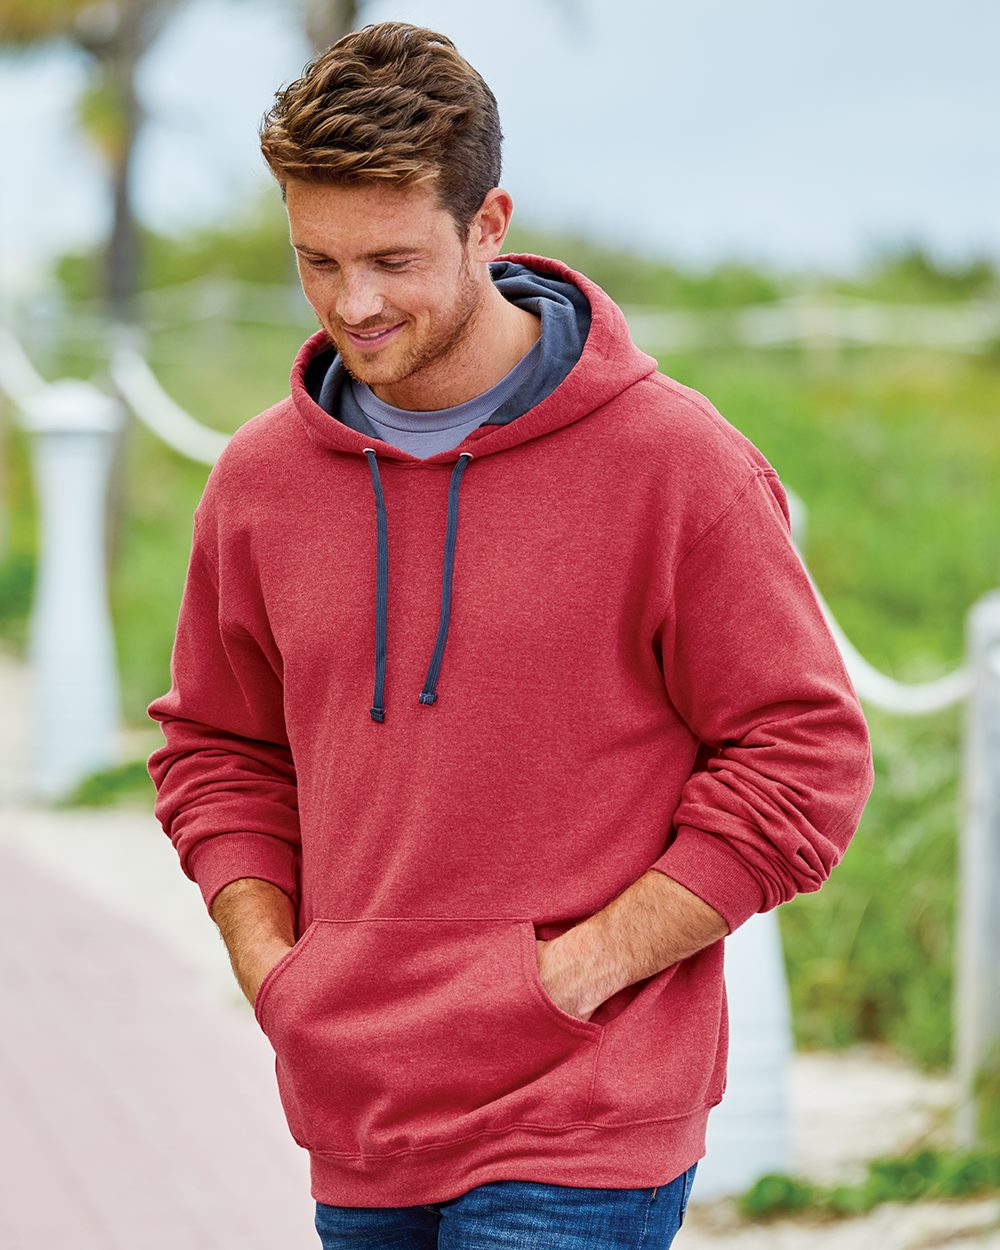 The Best 5 Blank Hoodies For Printing - Quality Blank Apparel